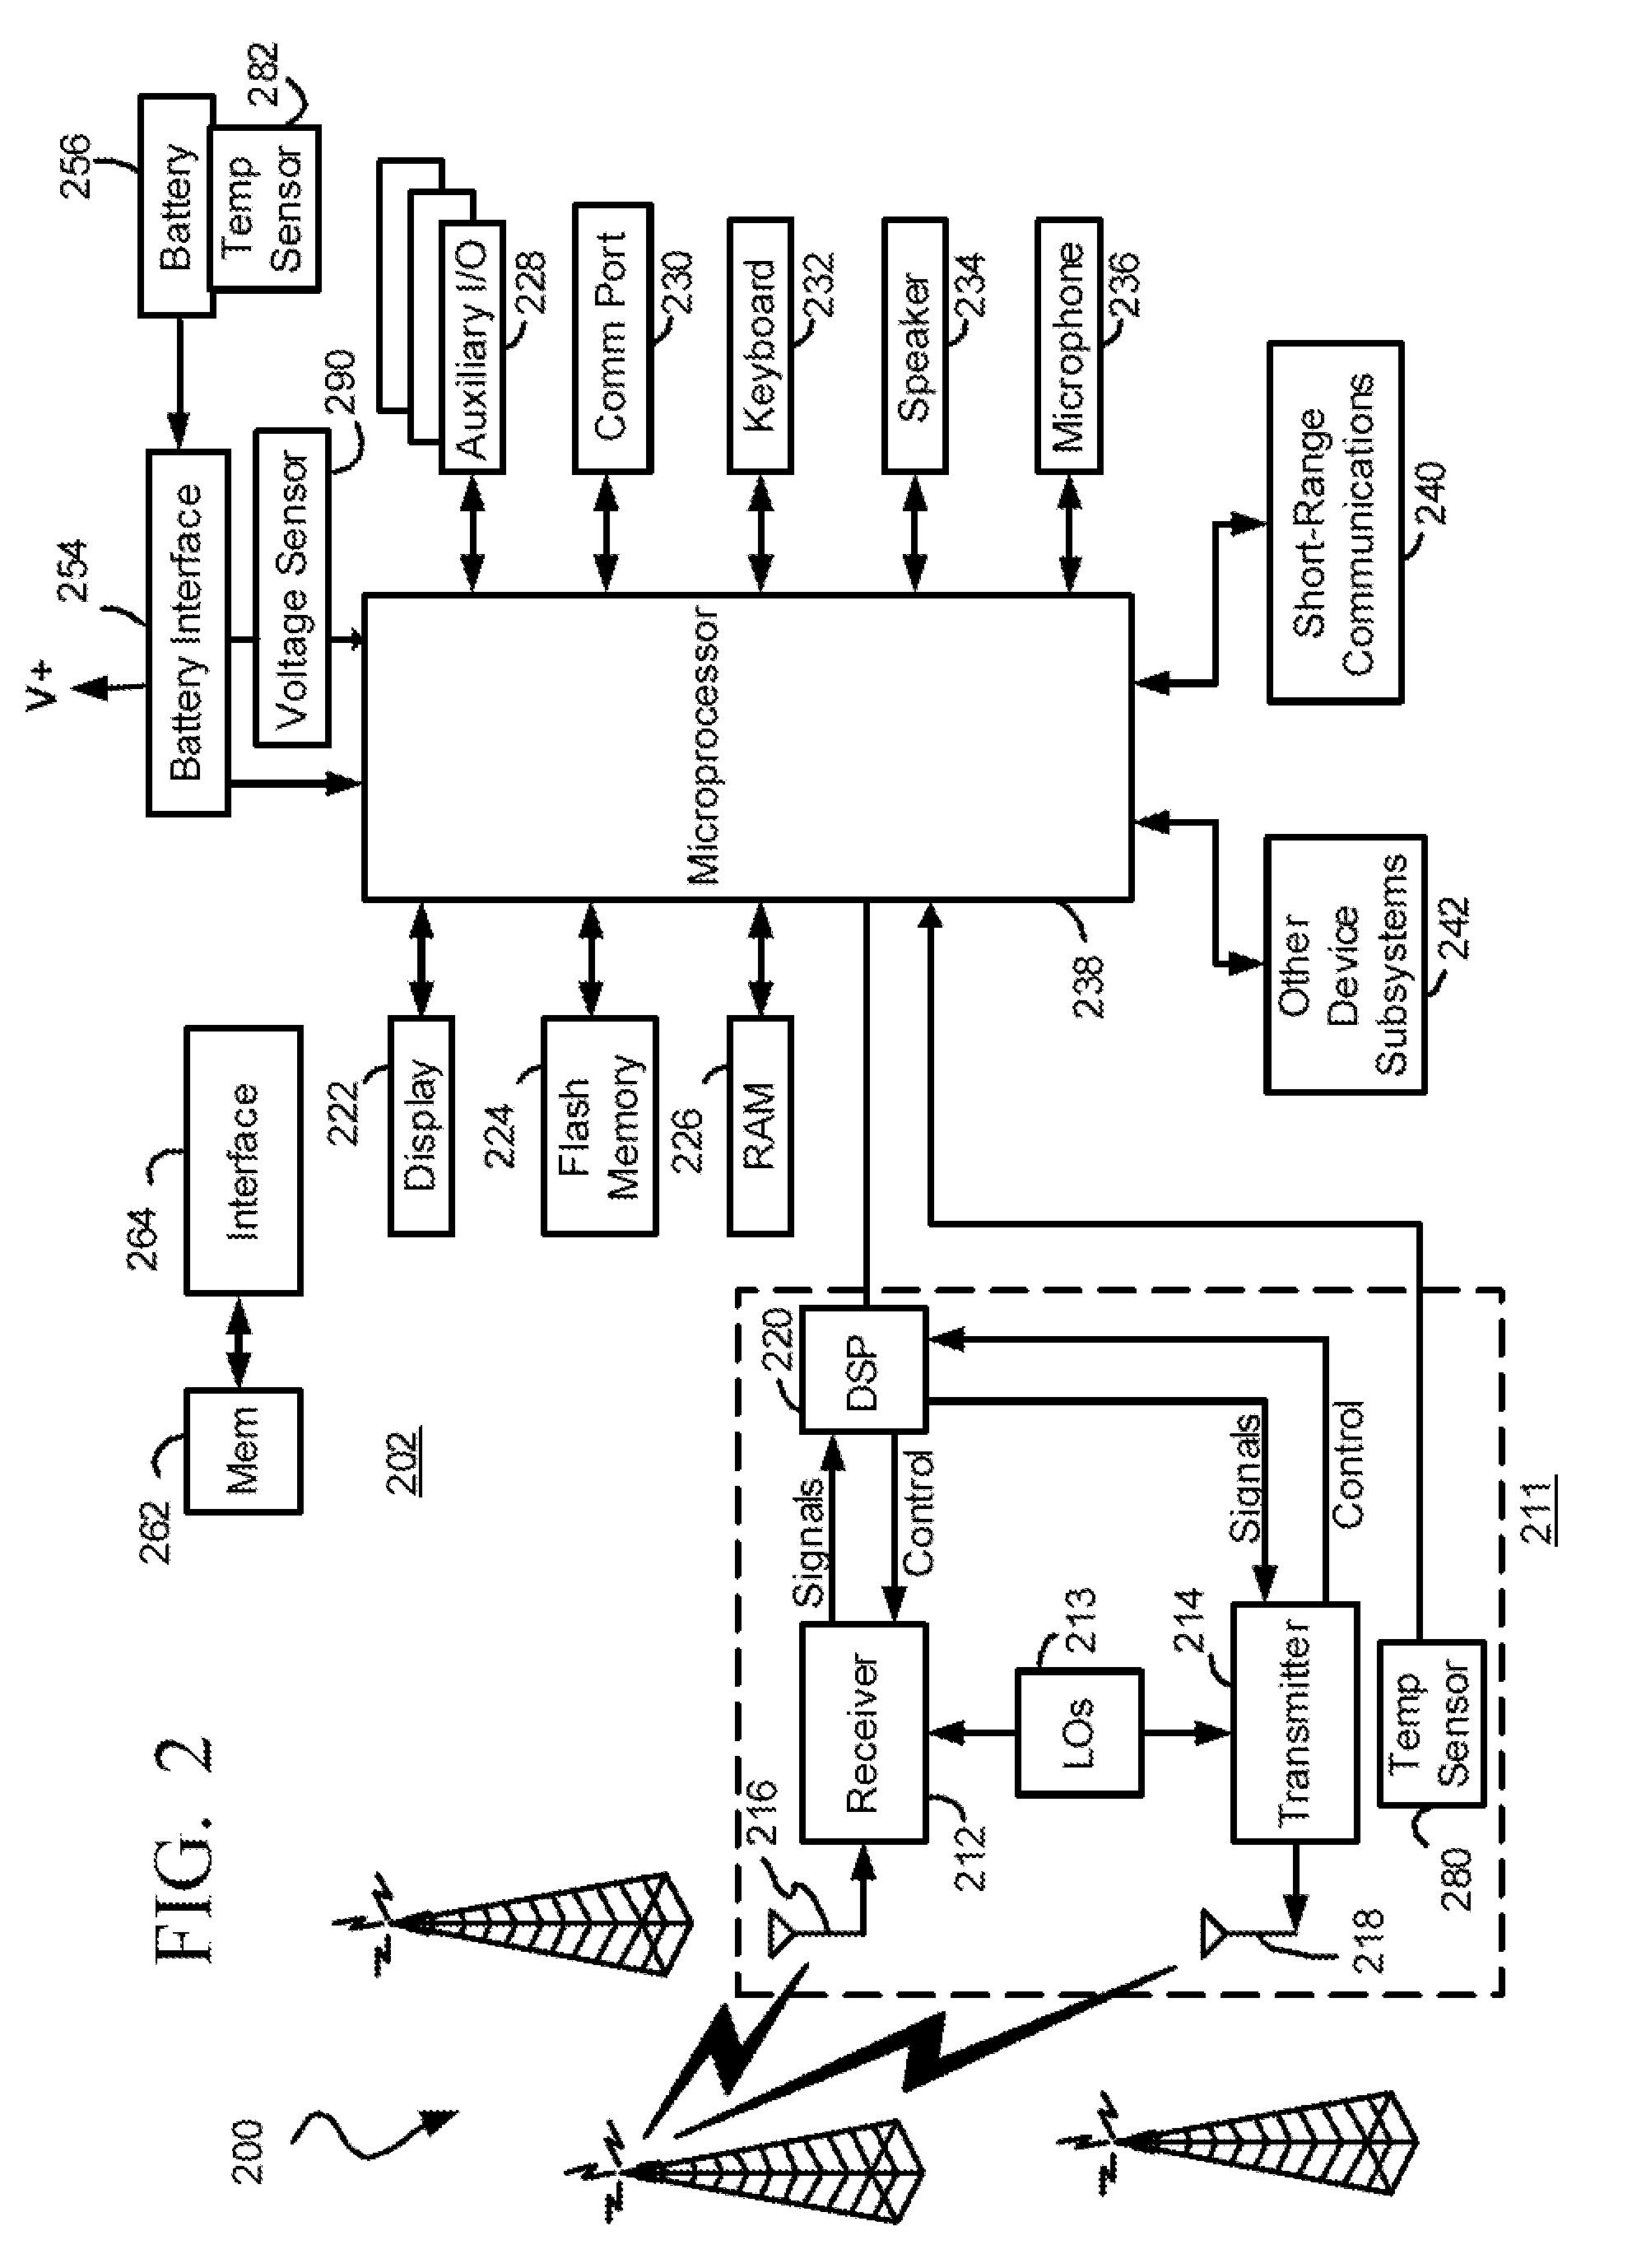 Methods And Apparatus For Limiting Communication Capabilities In Mobile Communication Devices